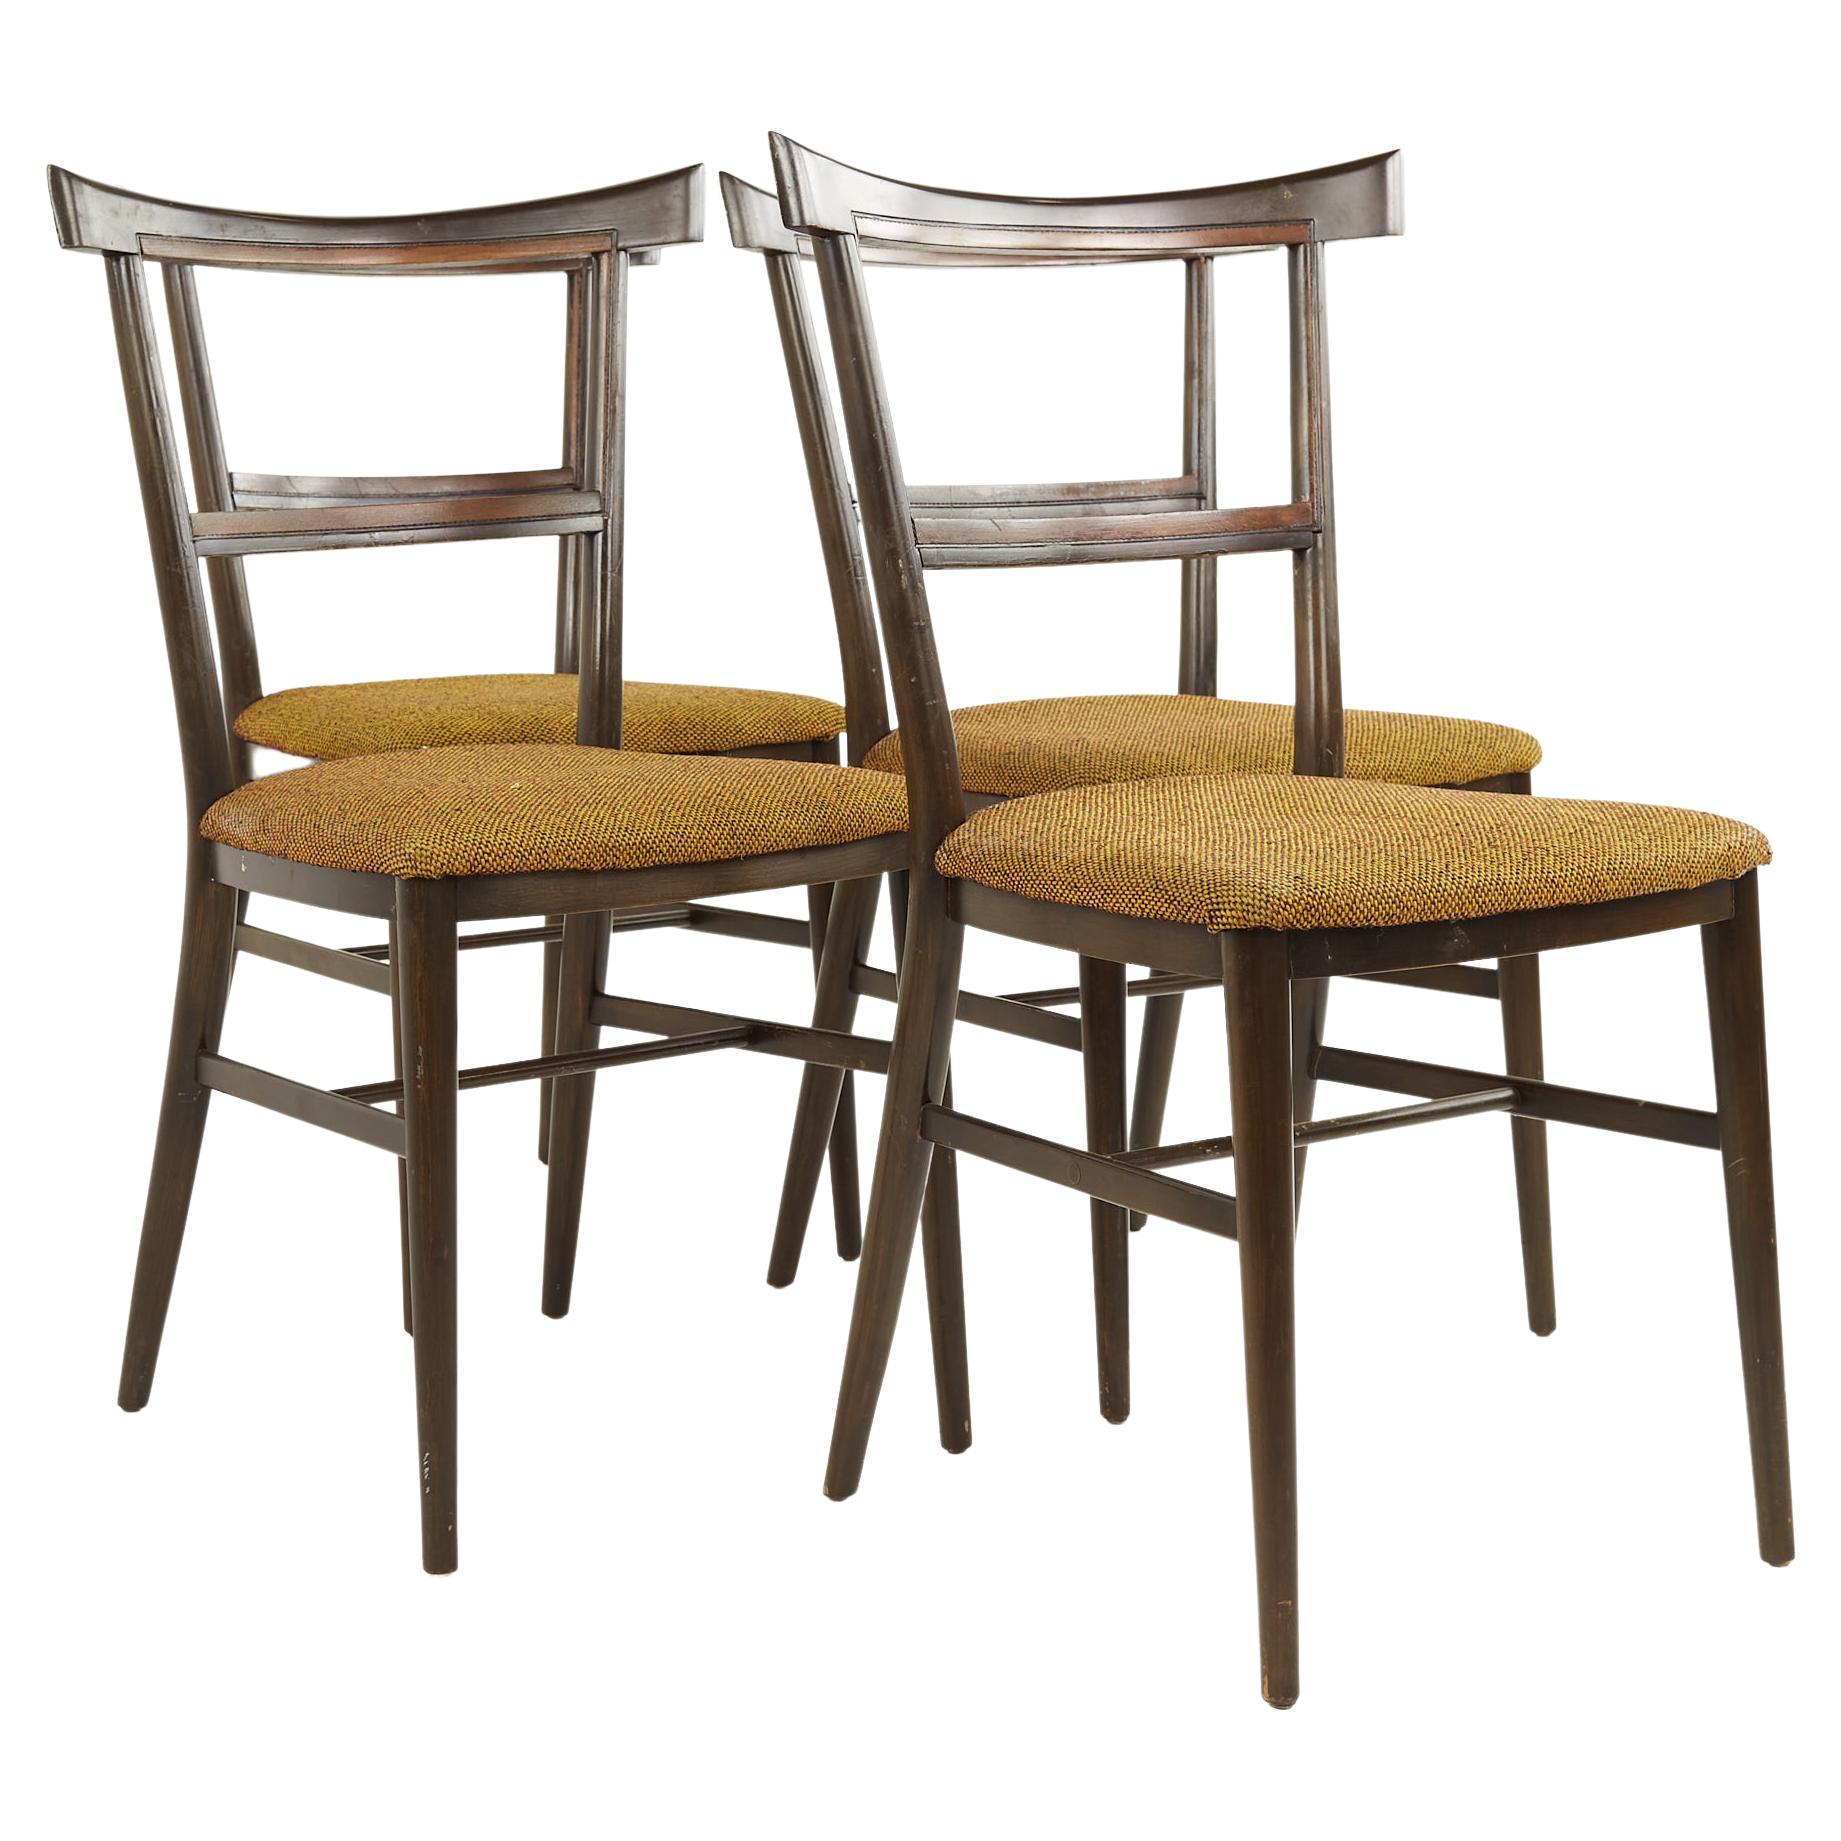 Paul McCobb for Calvin Mid Century Maple Dining Chairs, Set of 4